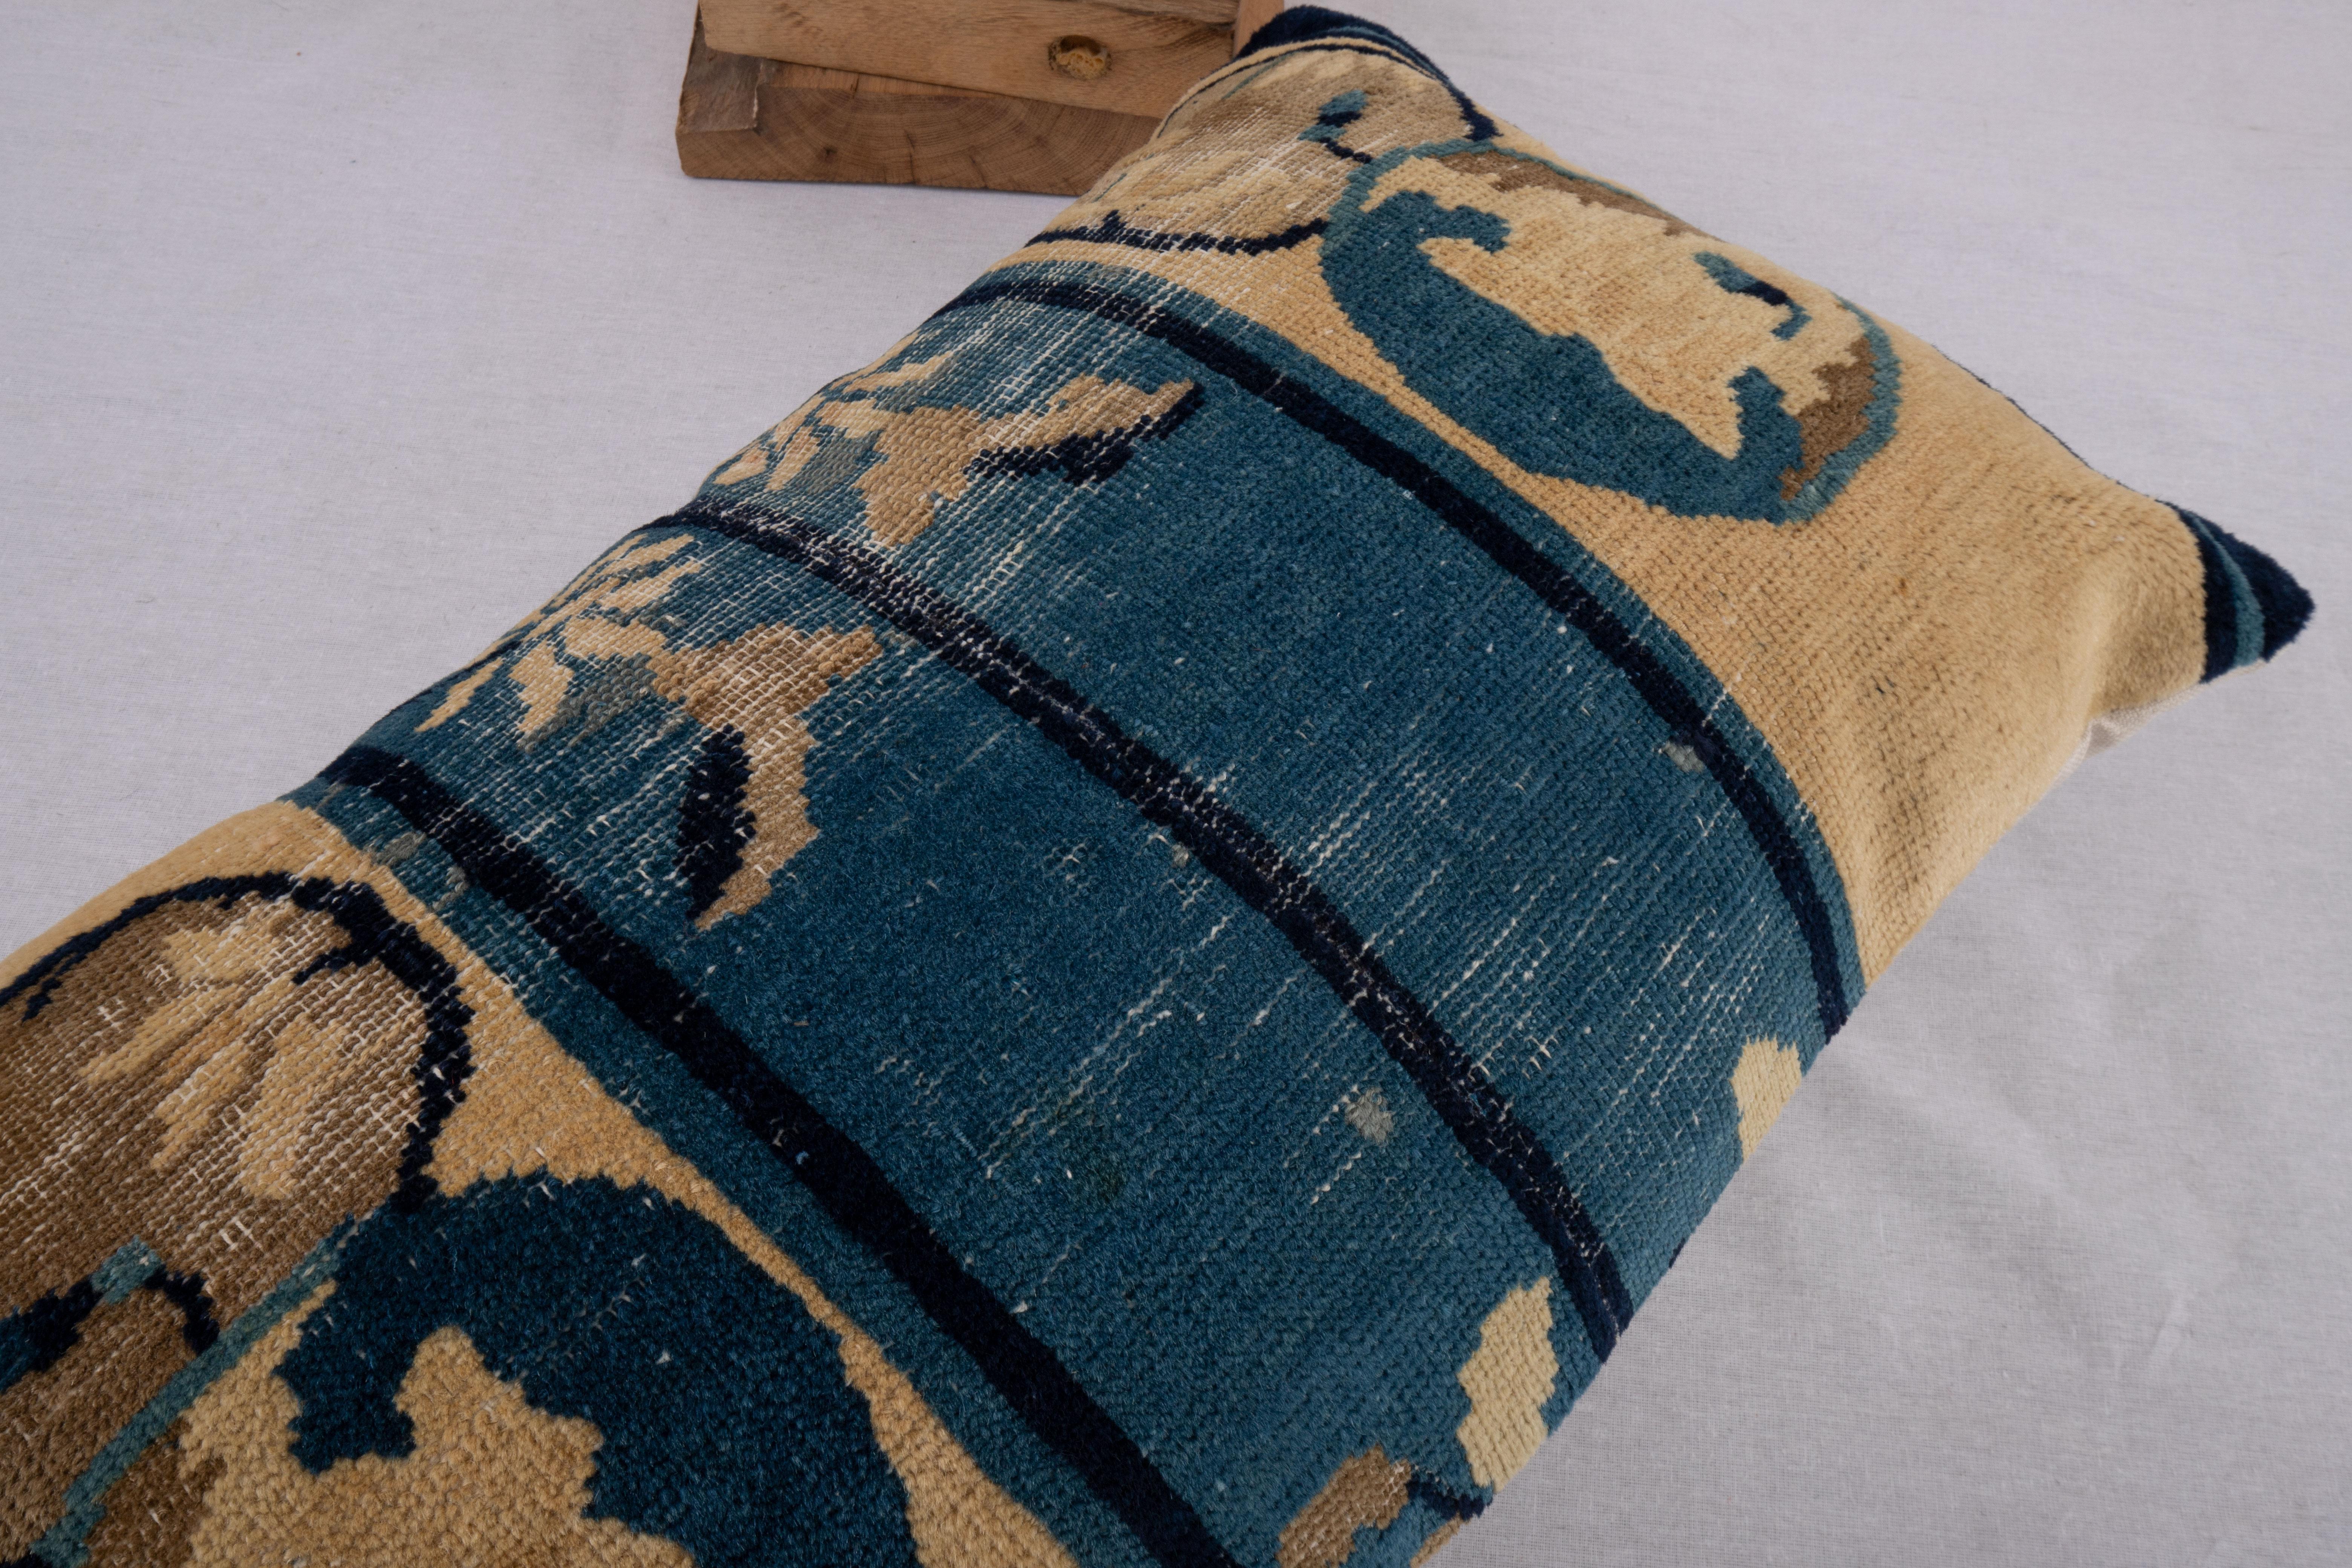 20th Century Pillow Cover Made from a Chinese Art Deco Rug, early 20th C. For Sale